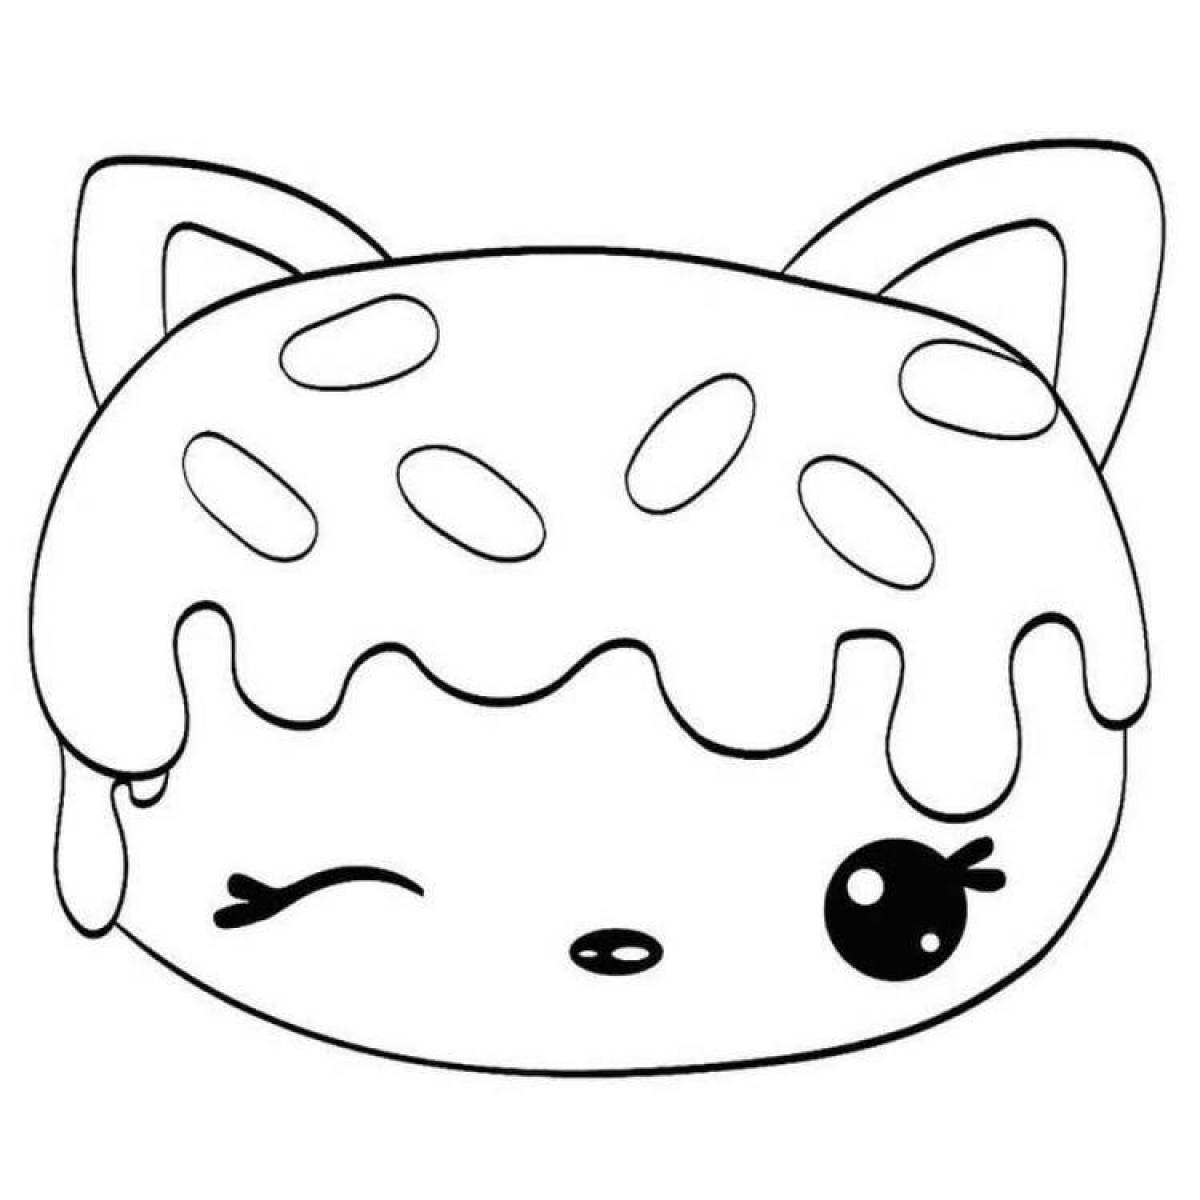 Kawaii cats in love coloring page